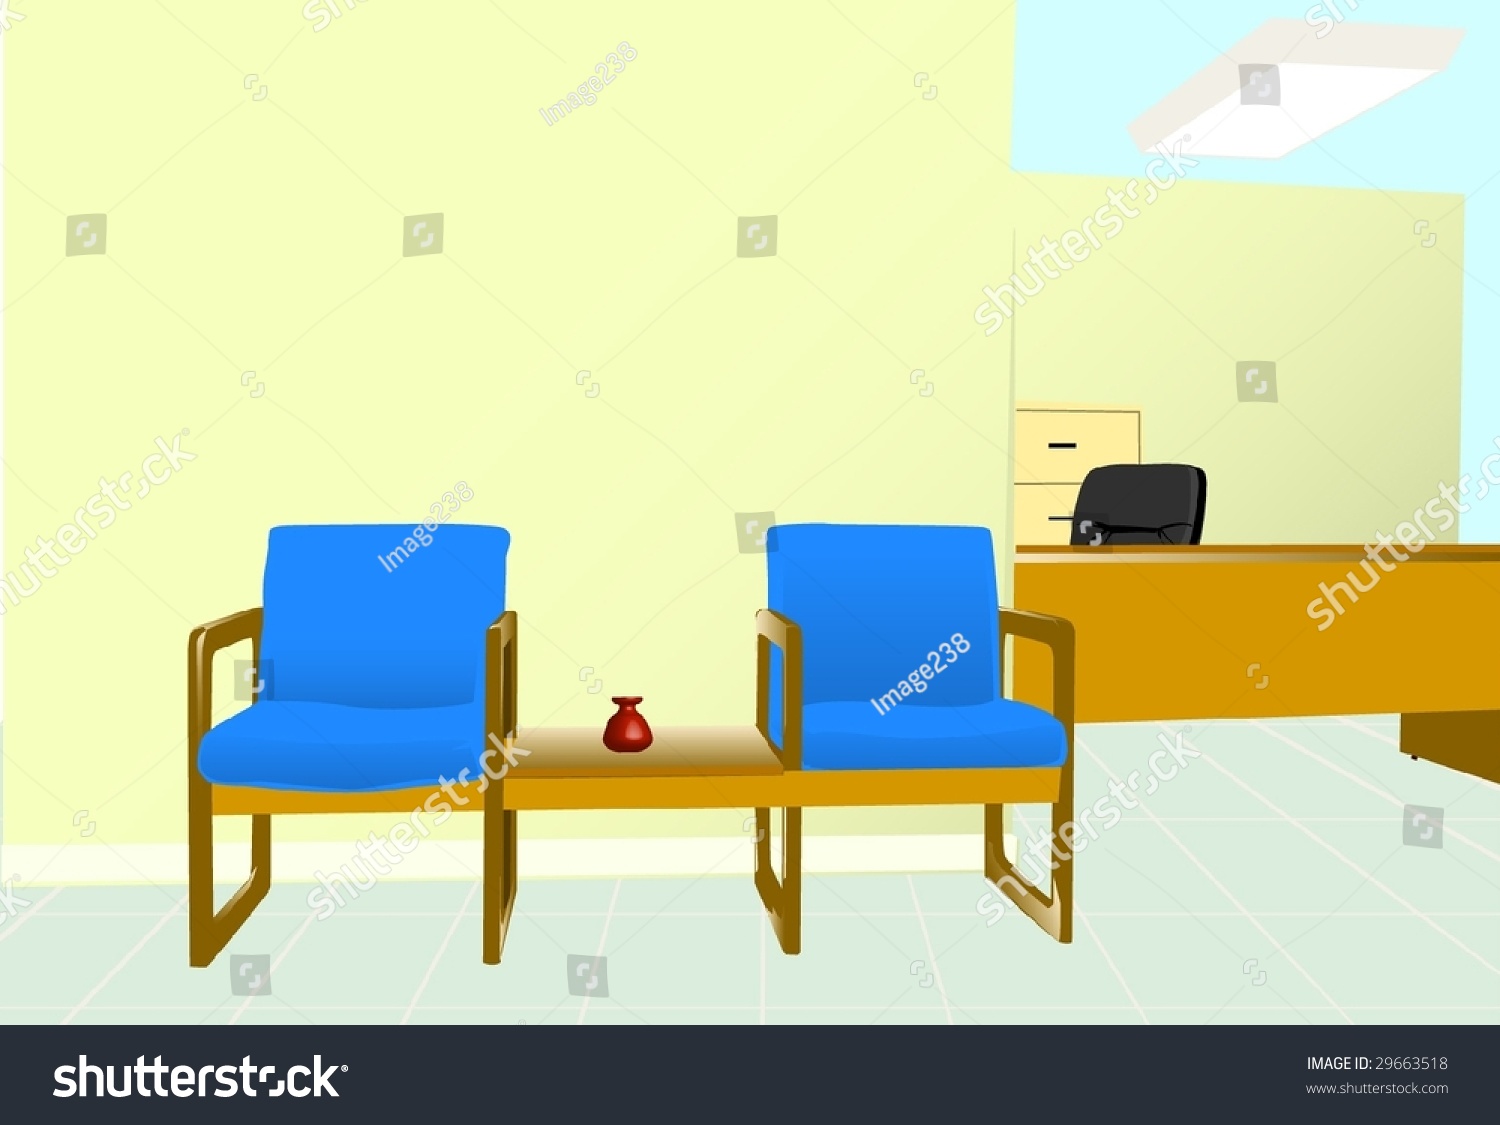 clipart waiting room - photo #34